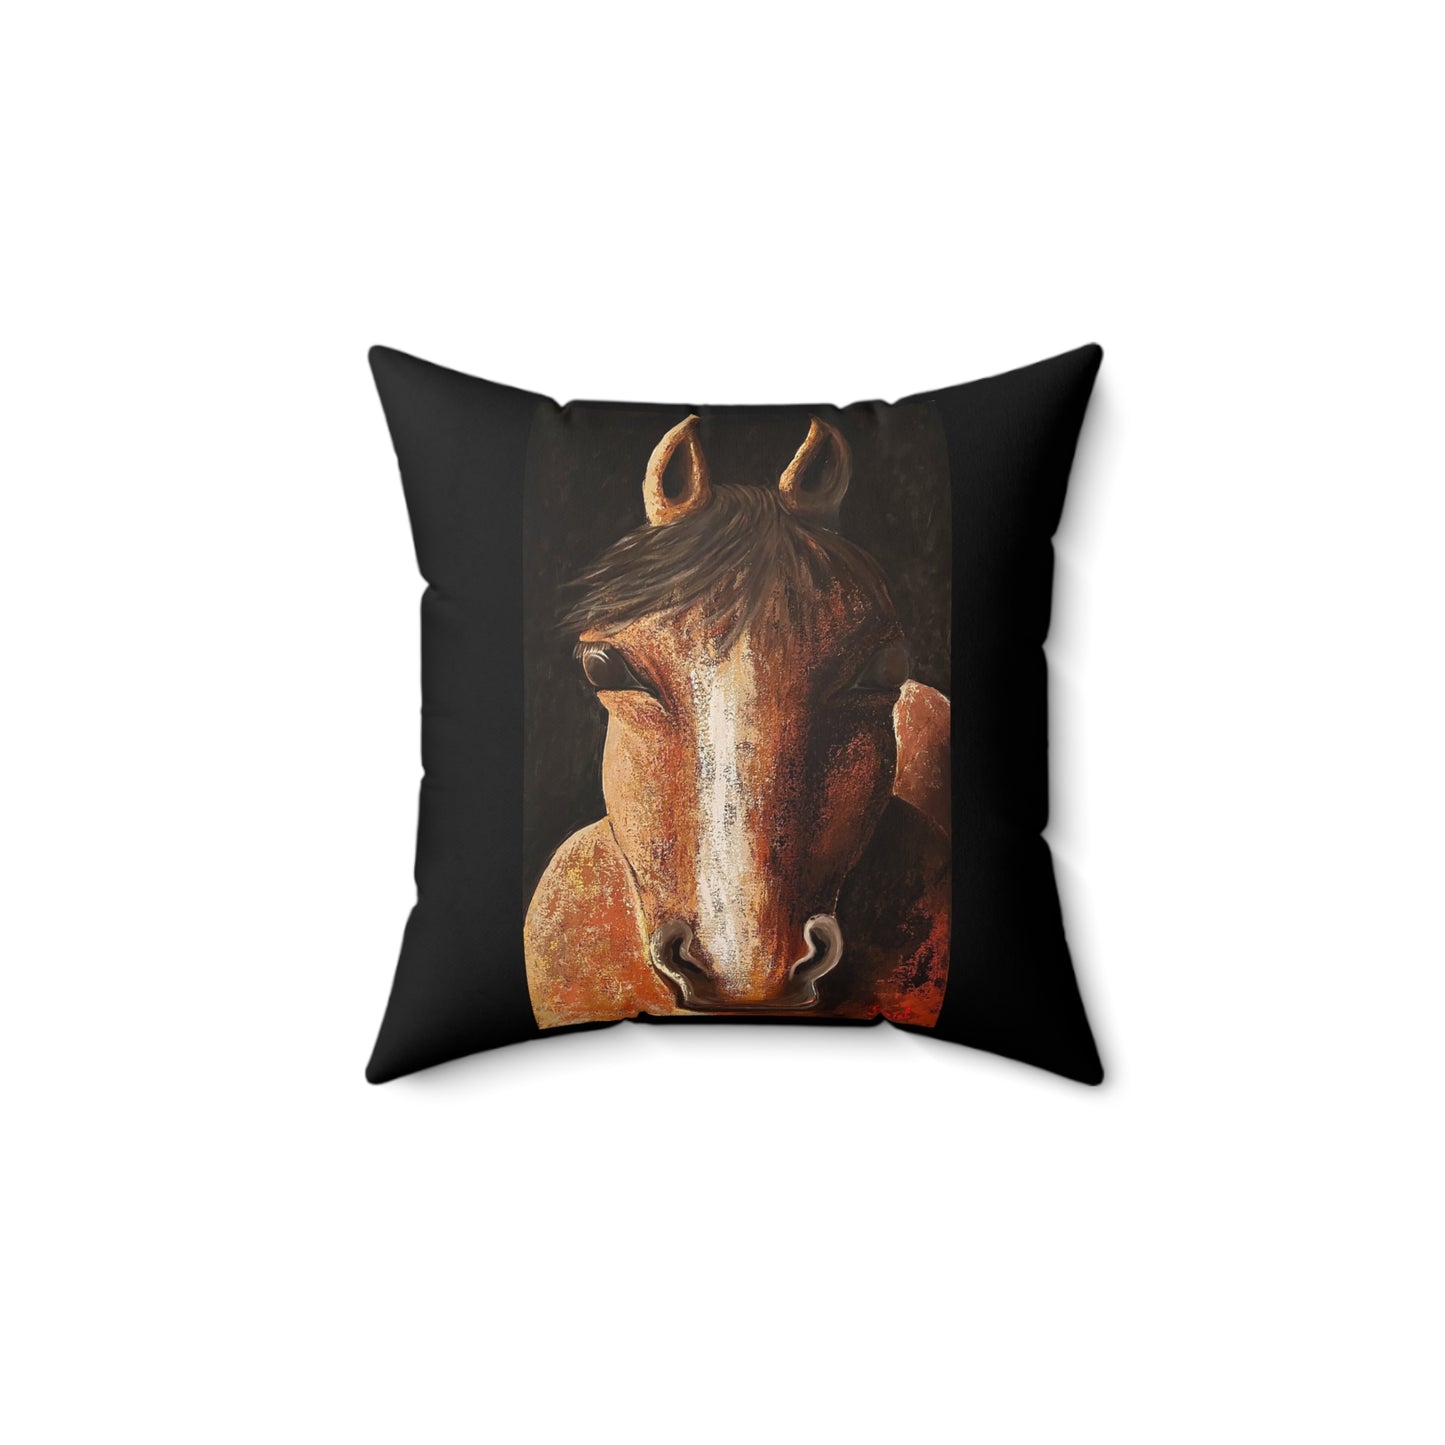 Faux Suede Square Pillow - Nigel Toss Pillow - Horse Throw Pillow